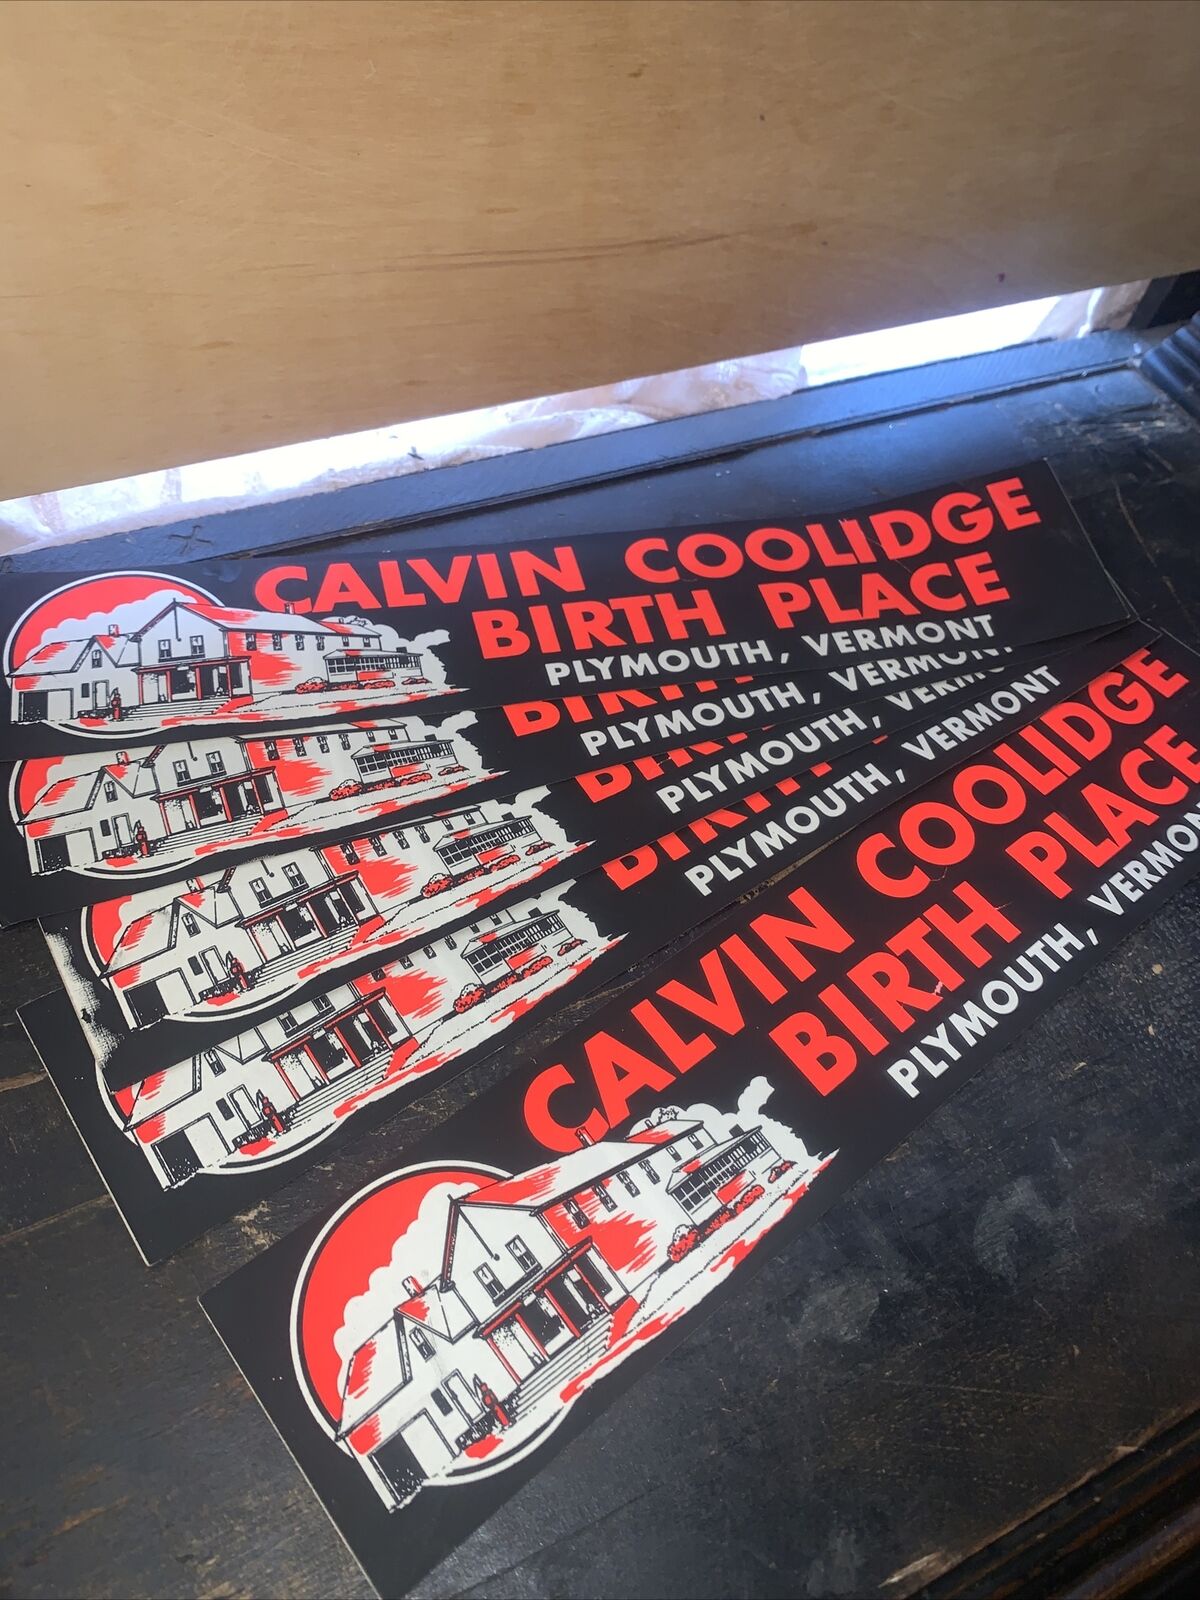 5 Vintage Calvin Coolidge - Bumper Stickers - Birth Place Plymouth, Vt￼.